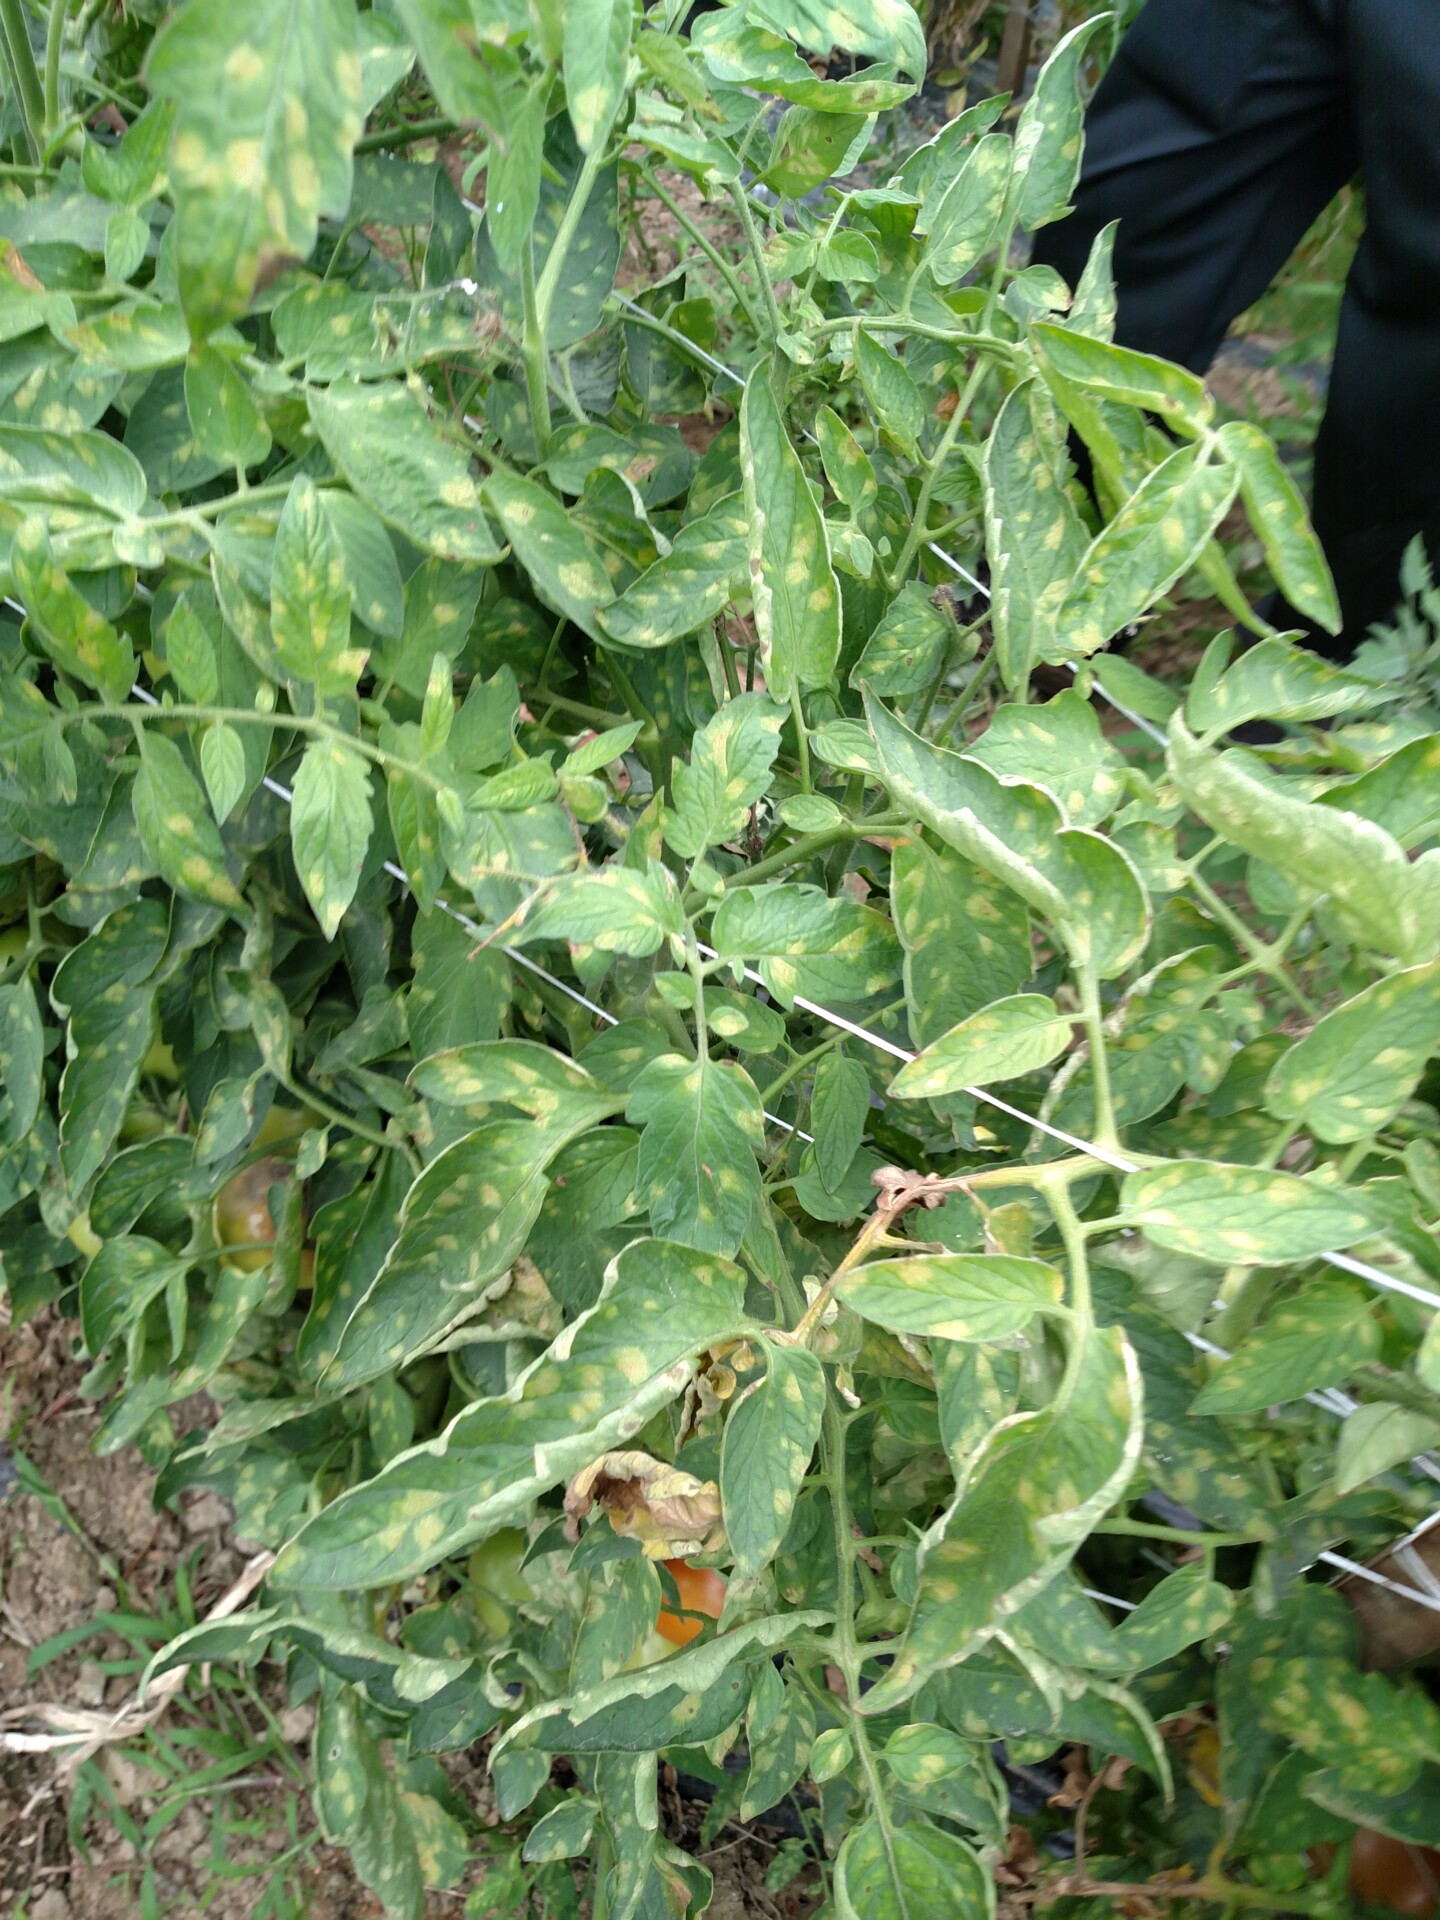 Chlorotic lesions on leaves caused by leaf mold of tomato.